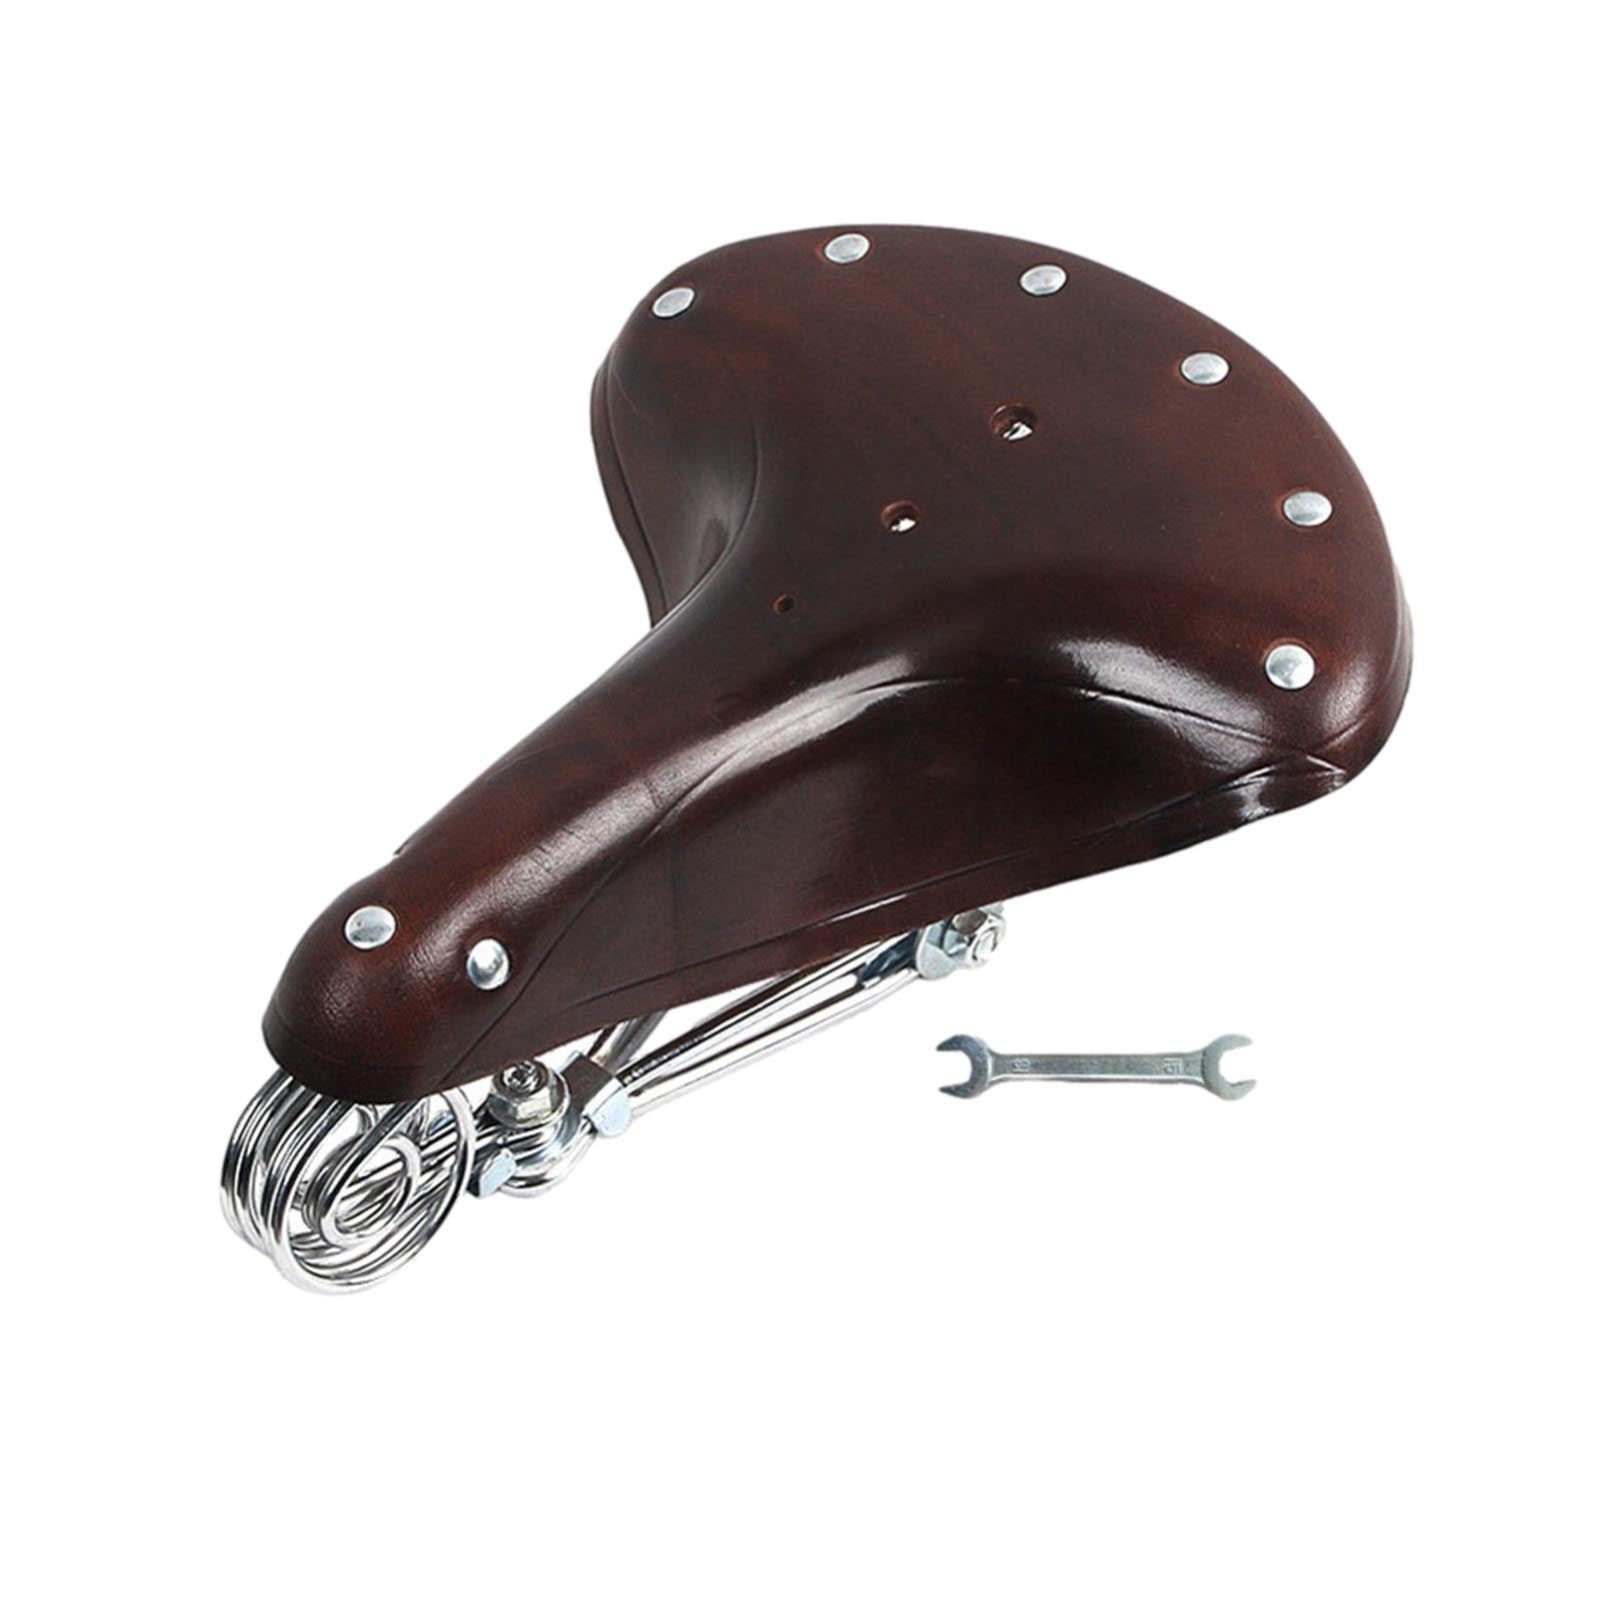 Details about   Bike Bicycle Seat Saddle Comfort Vintage Style Cruiser Brown